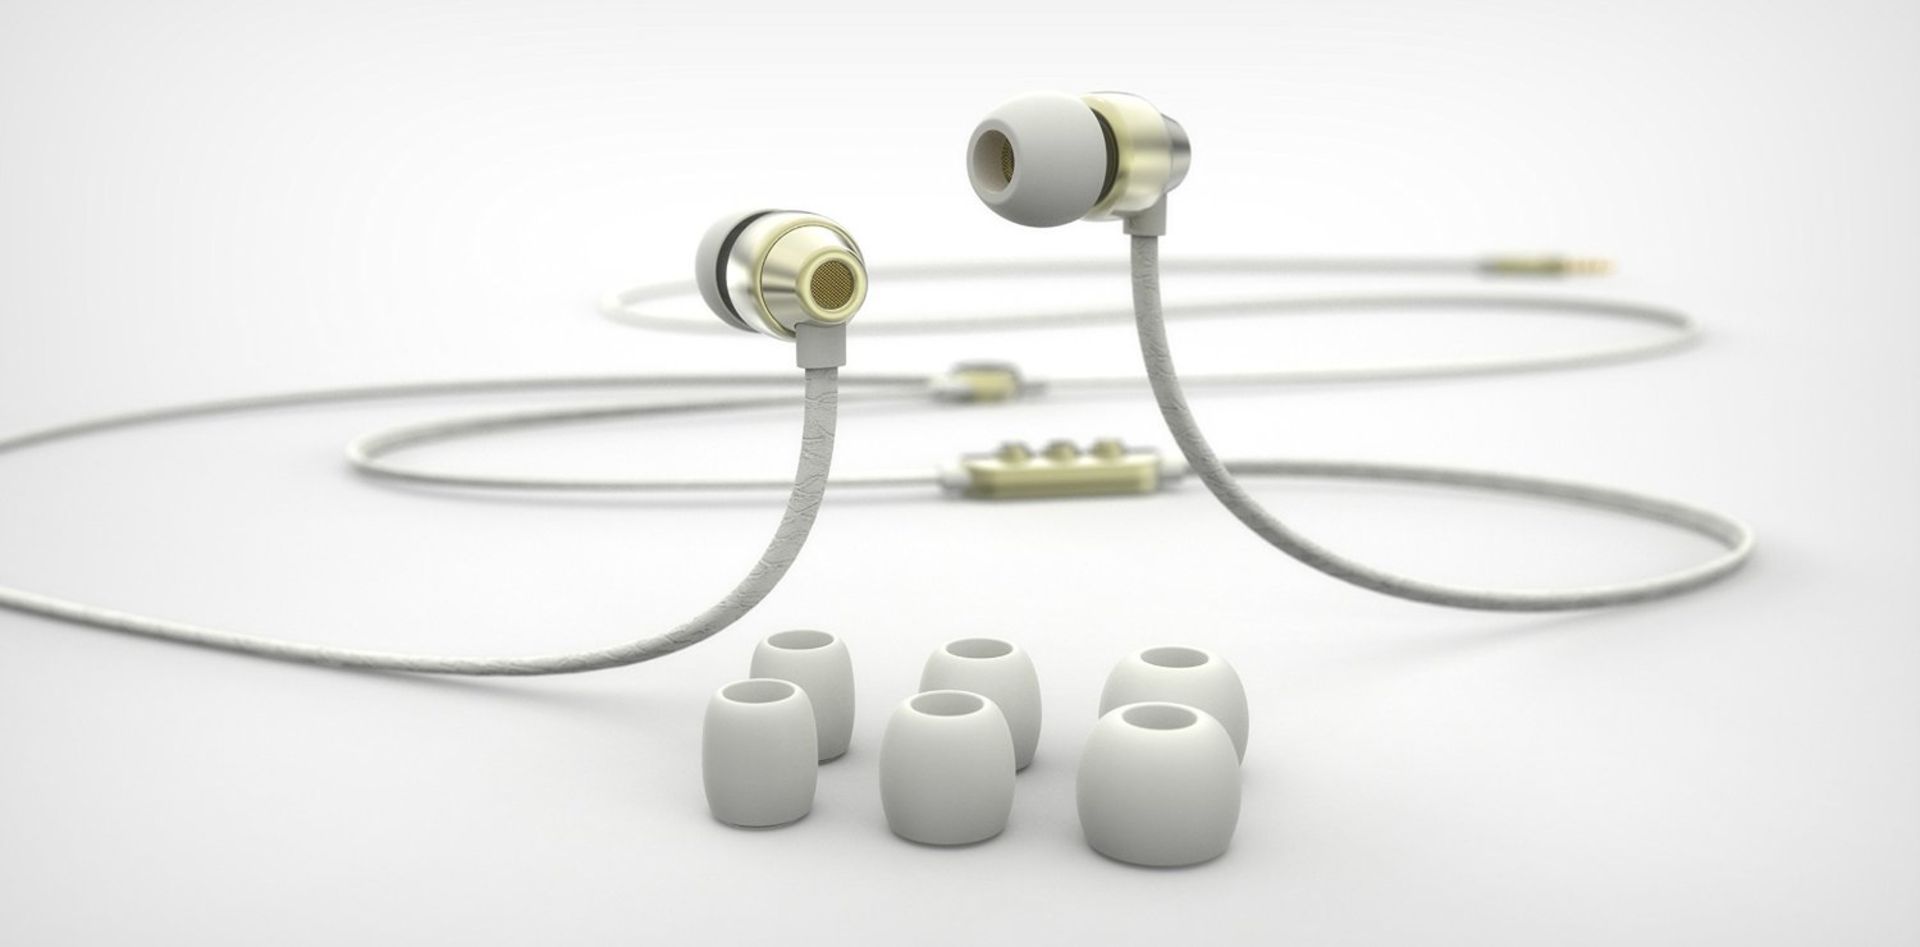 V *TRADE QTY* Brand New Ted Baker Dover High Performance In-Ear Earphones White/Gold RRP £59.99 - Image 2 of 2